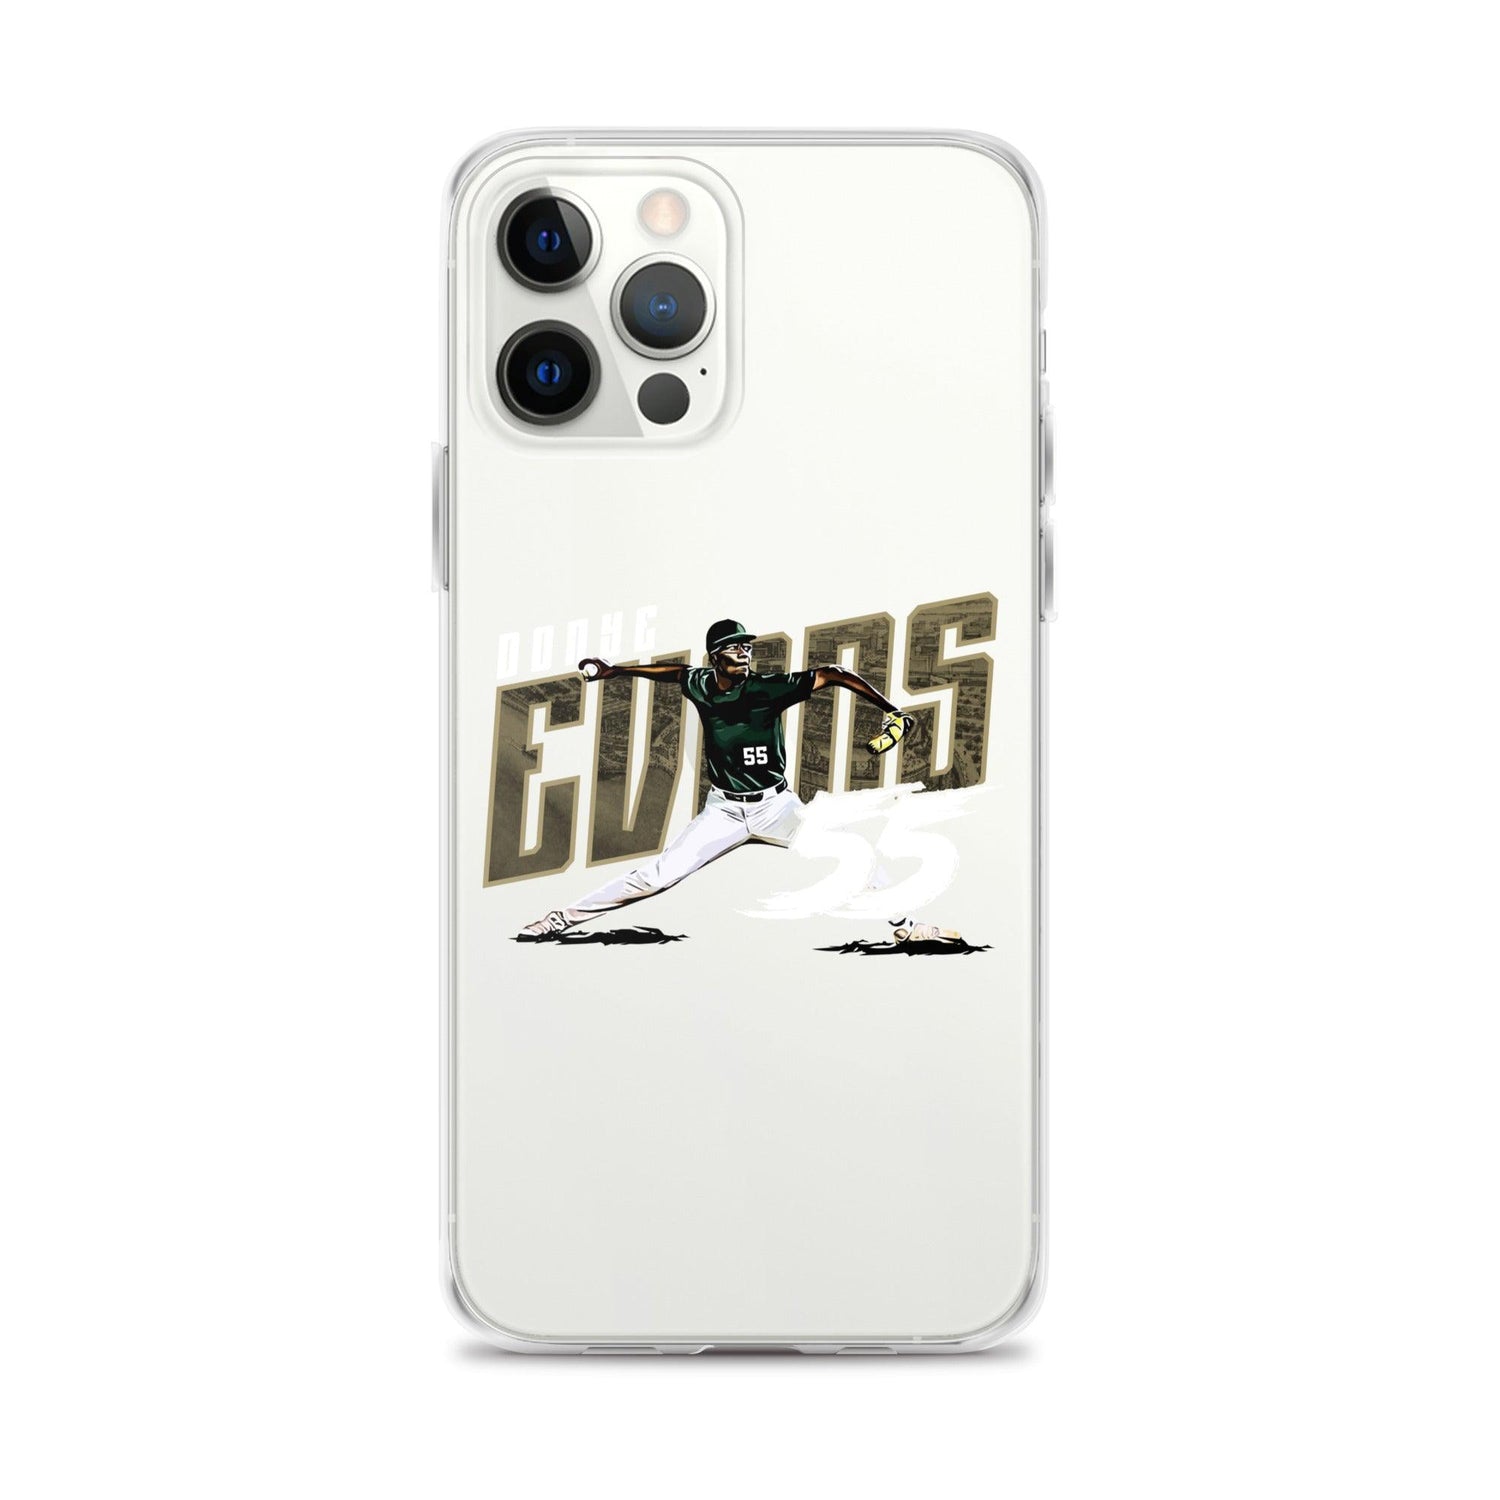 Donye Evans "Gametime" iPhone Case - Fan Arch